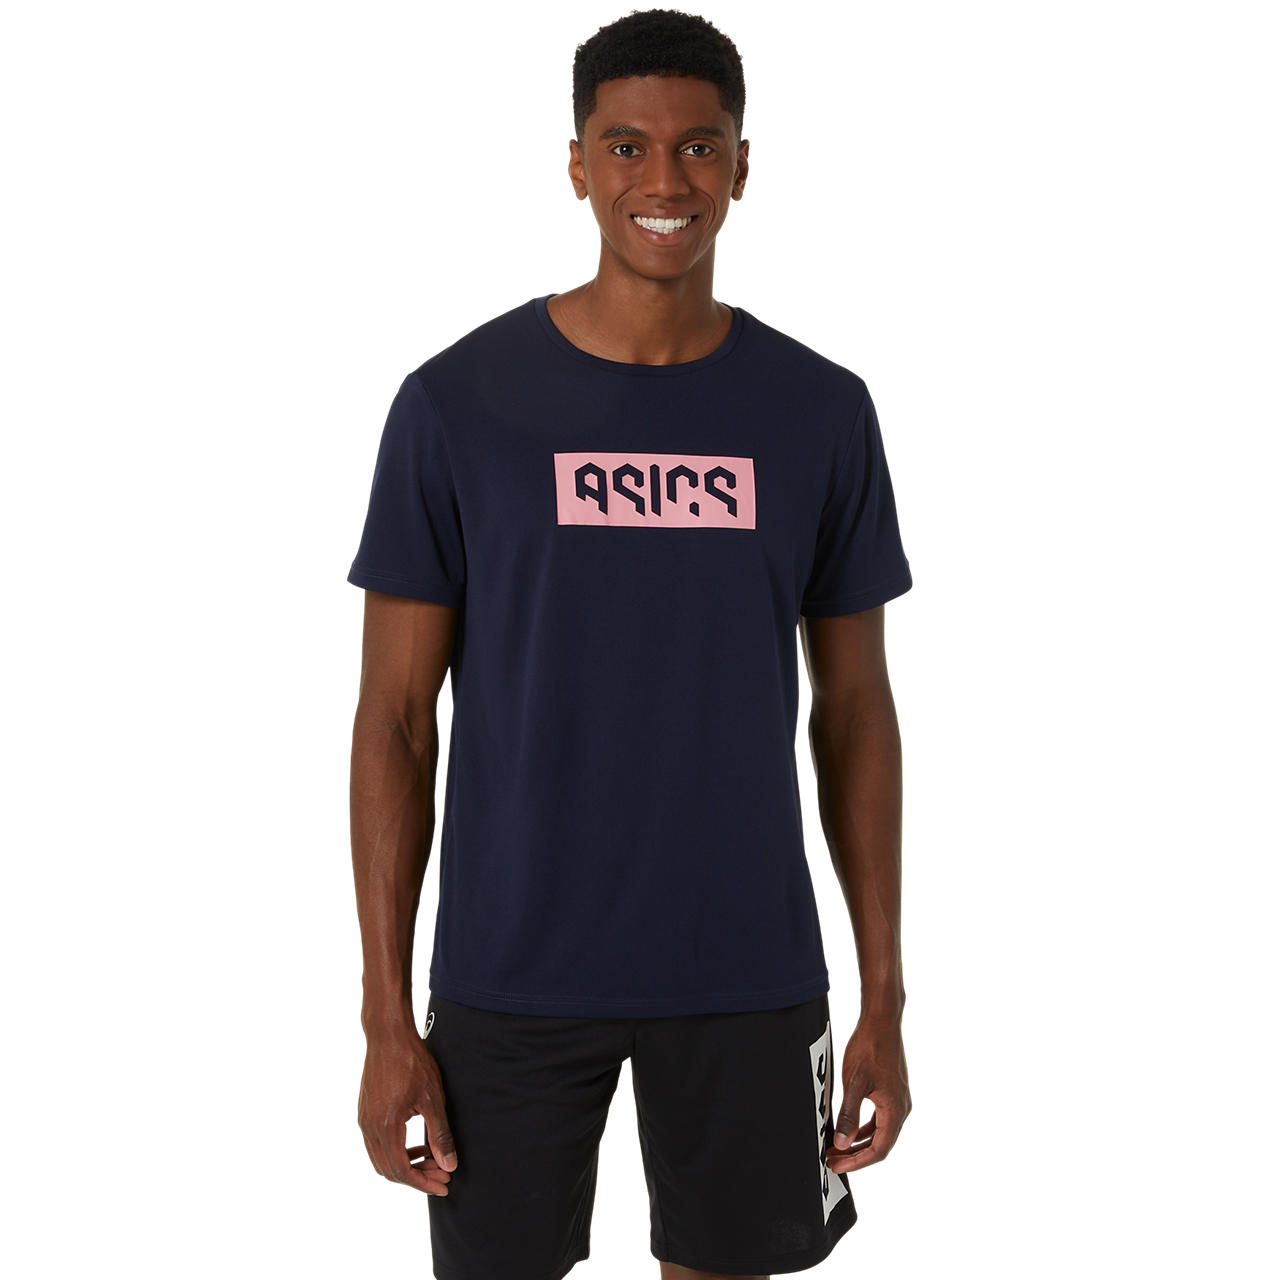 ASICS HEX GRAPHIC DRY SS TEE, MIDNIGHT/FRUIT PUNCH, swatch